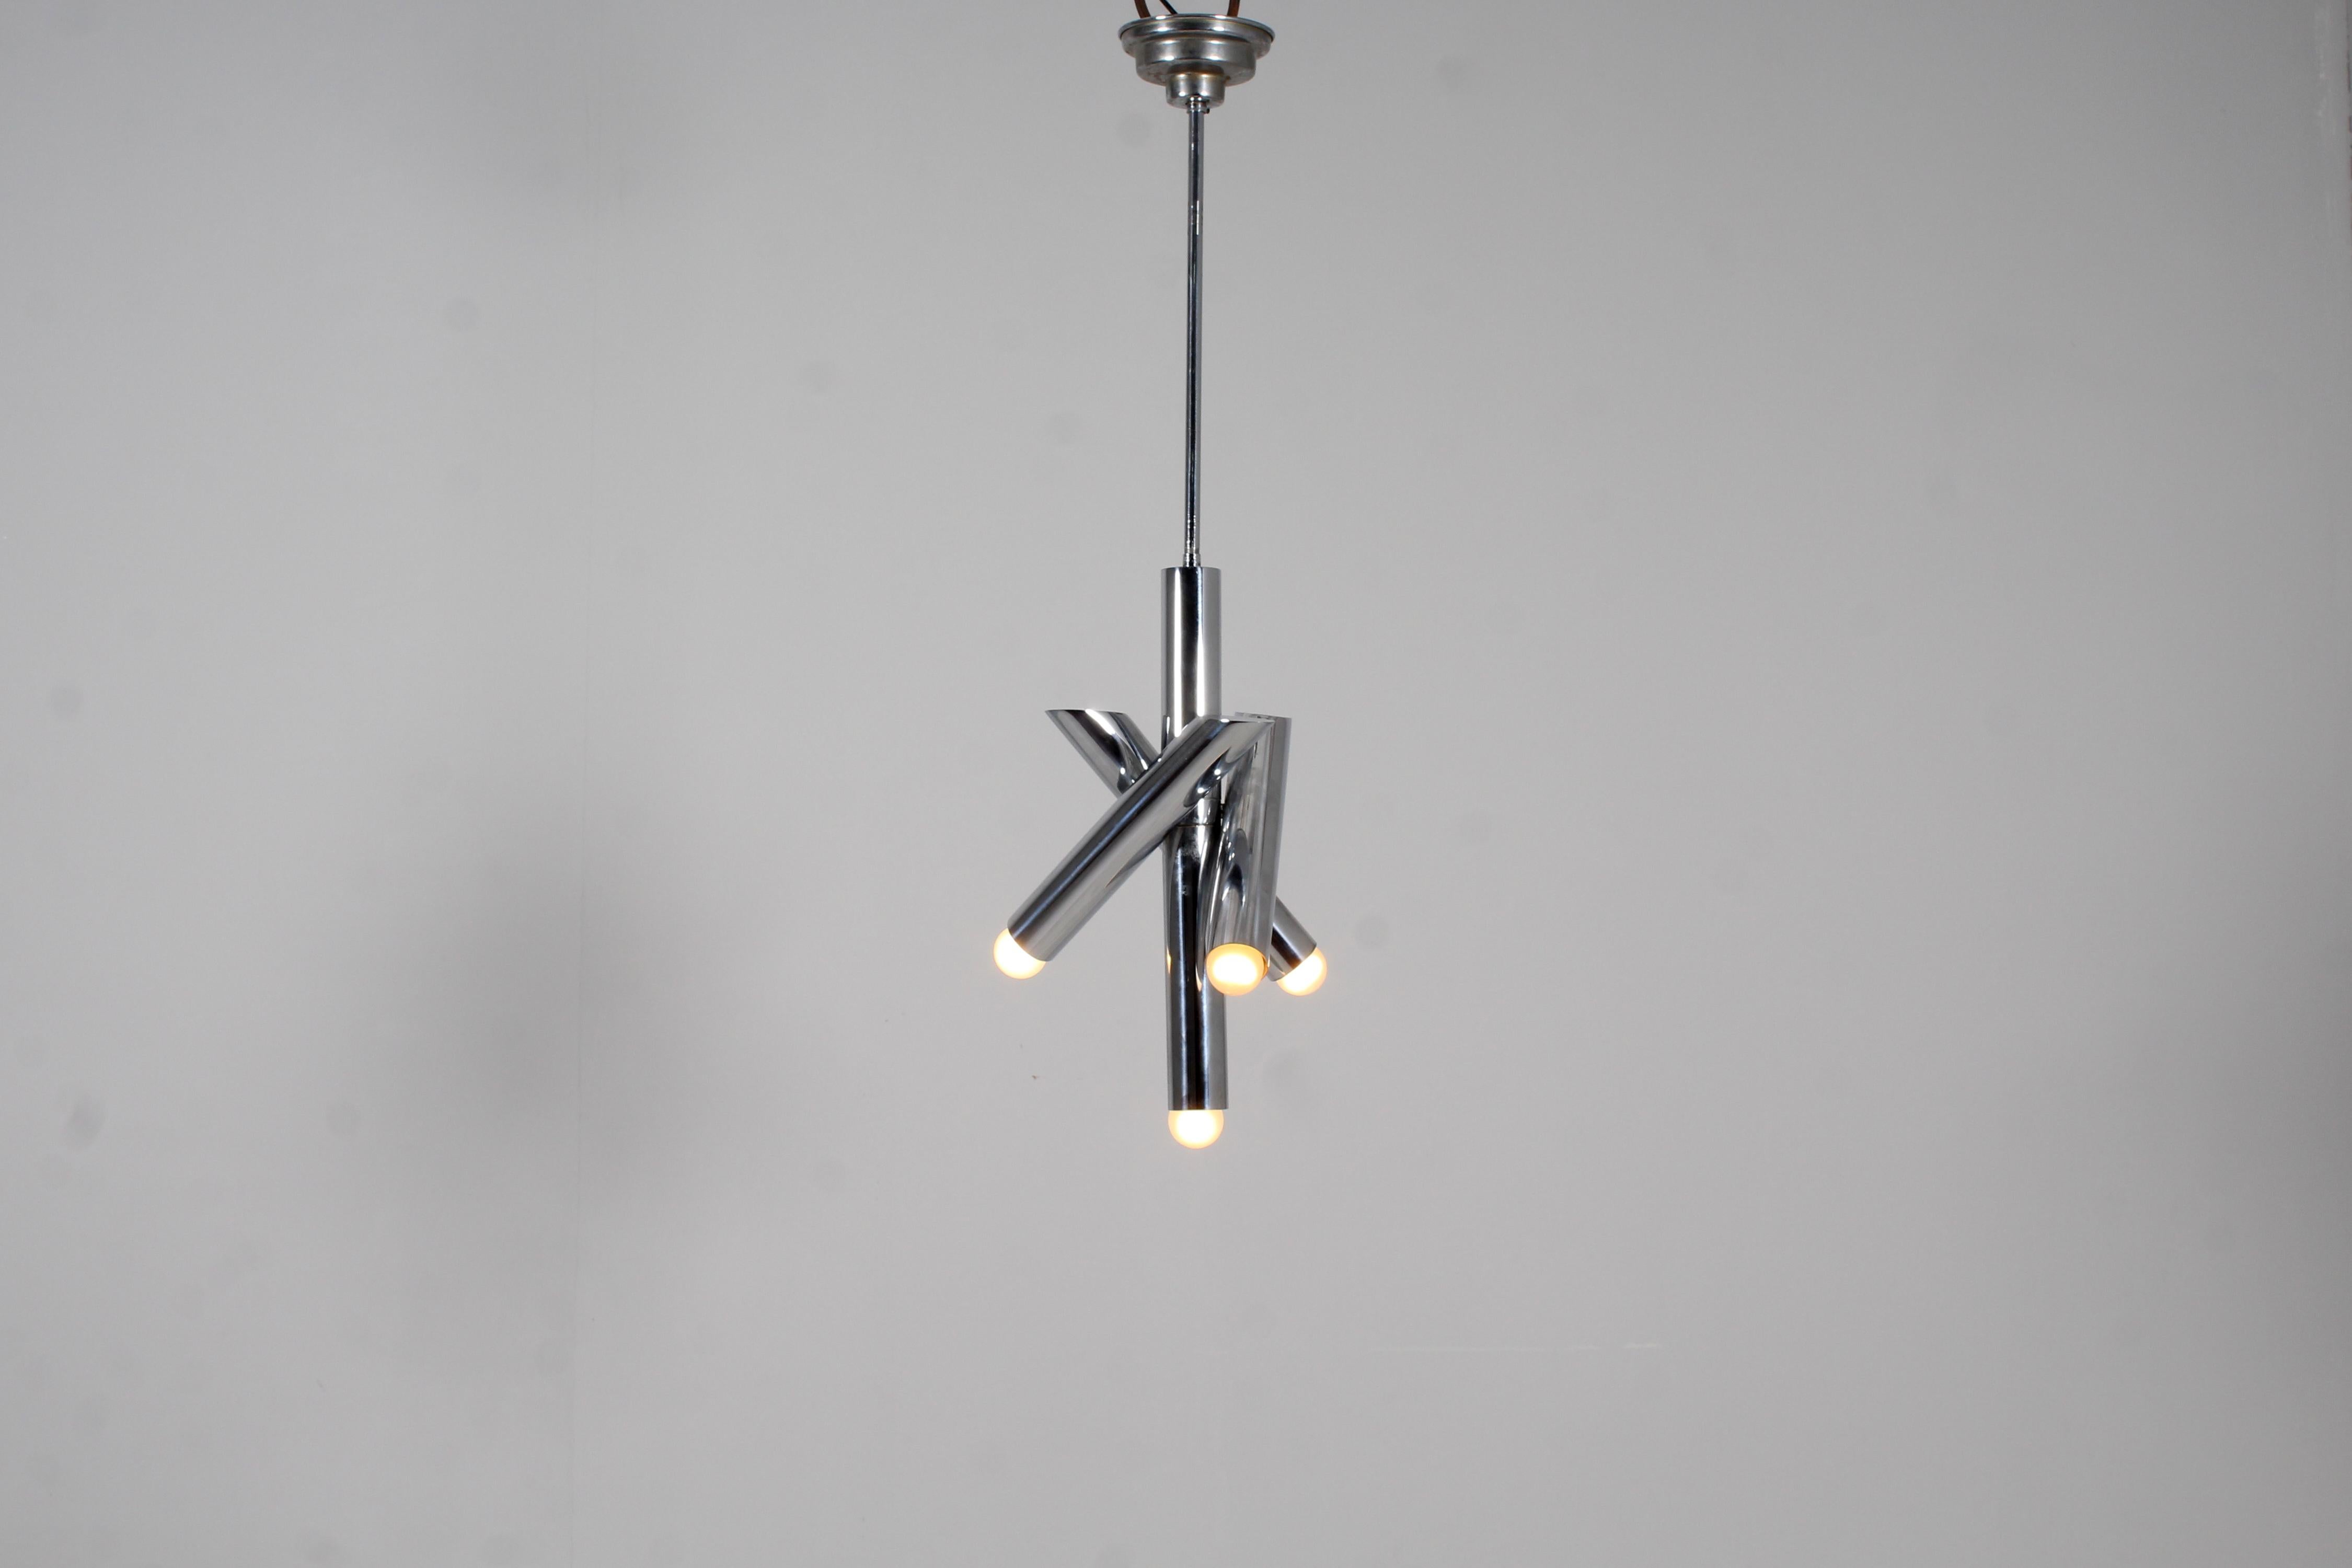 Space Age Reggiani Chromed Steel Adjustable Suspension Lamp 70s Italy For Sale 3